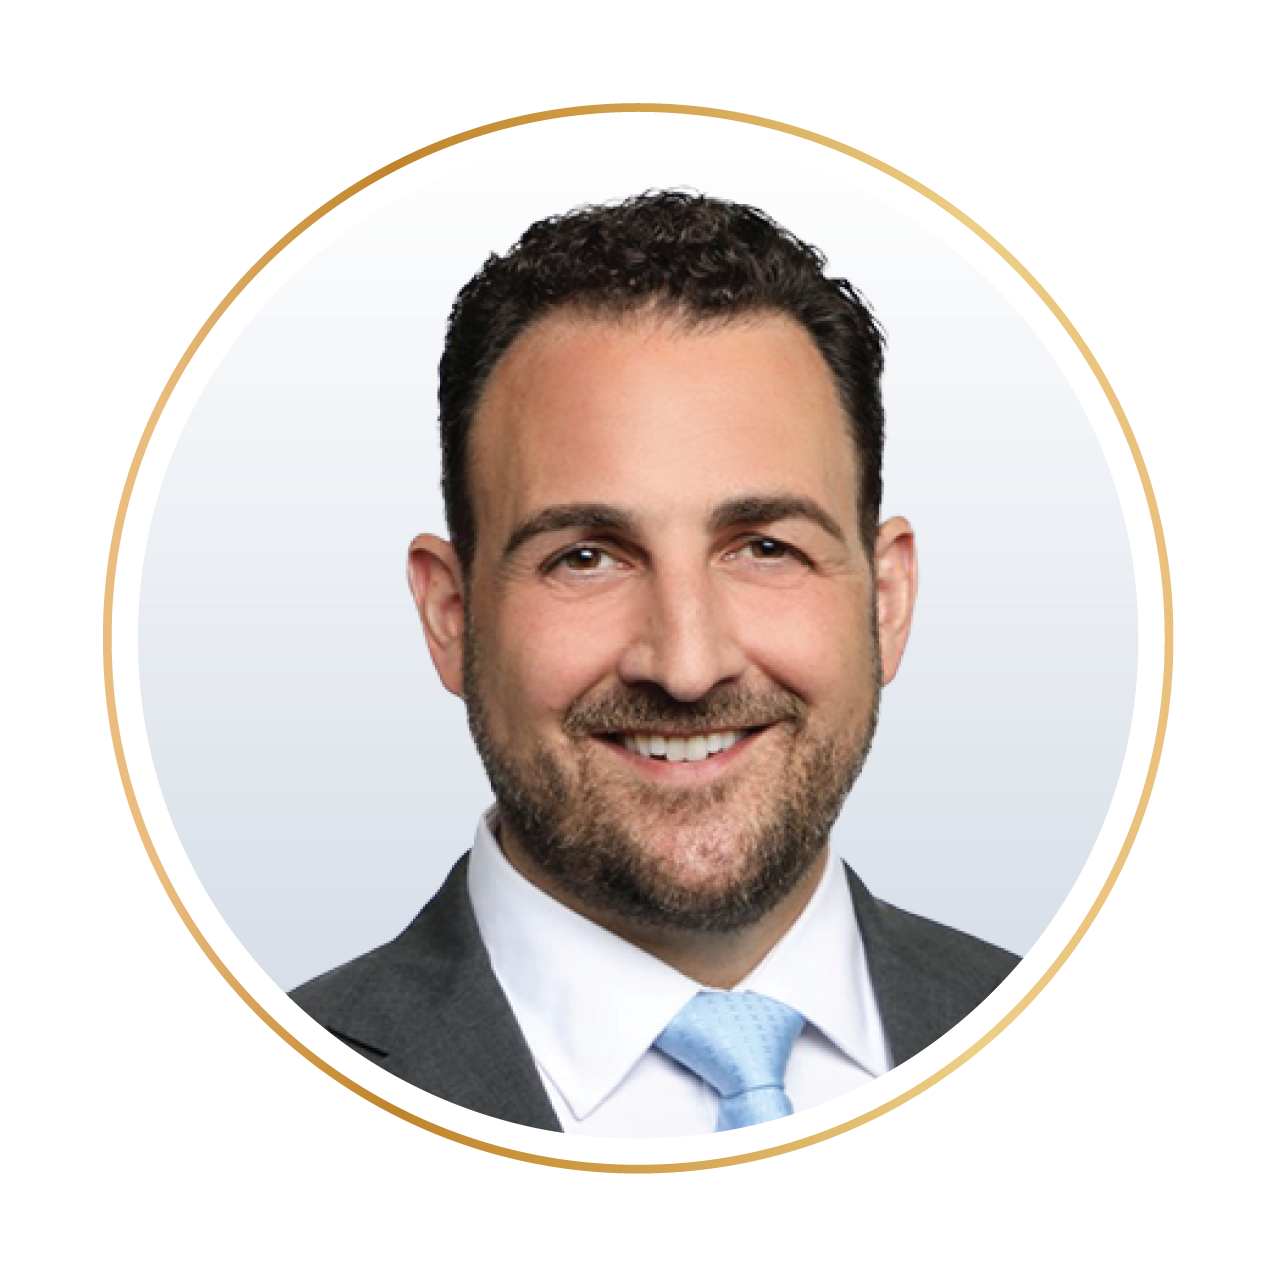 Chris Niro - VP of Business and Legal Affairs